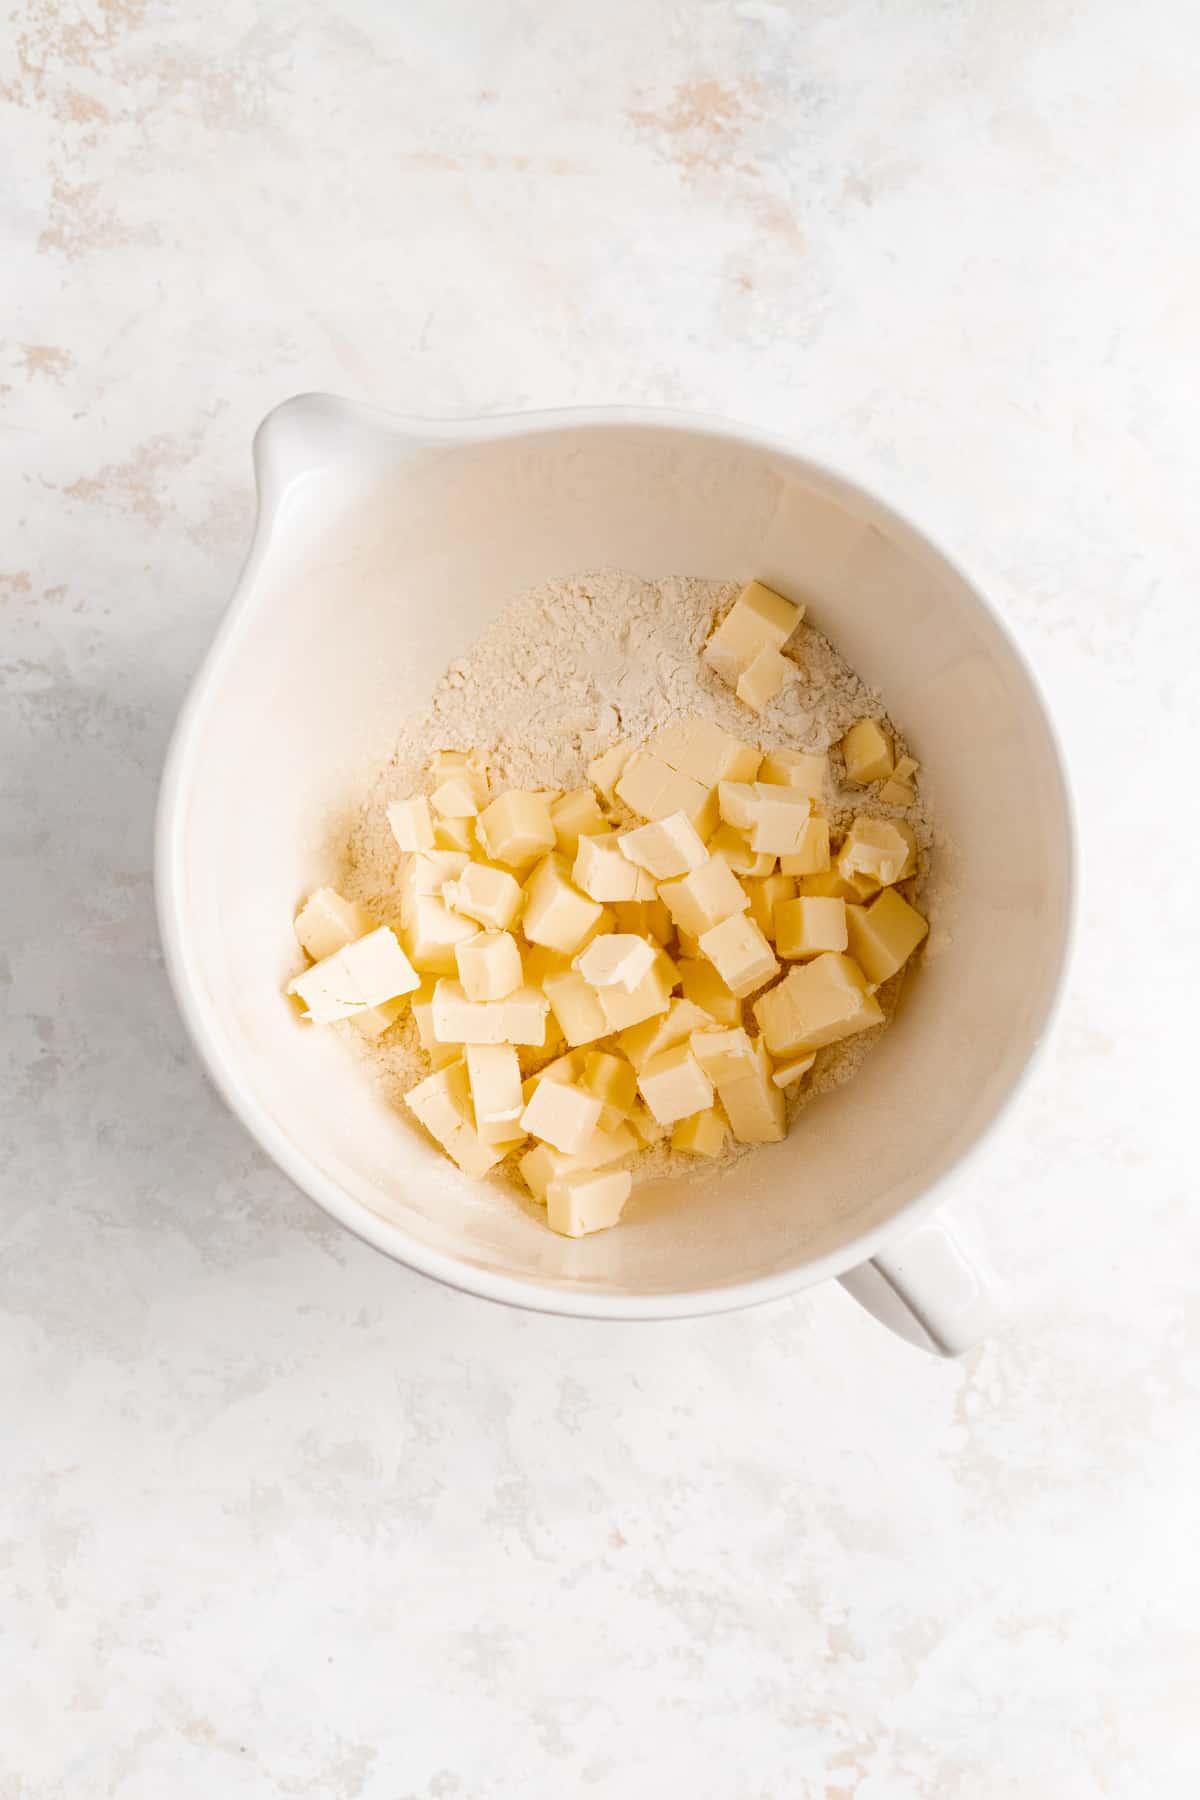 cold cubed butter on a pile of flour in a white mixing bowl on a white plaster background